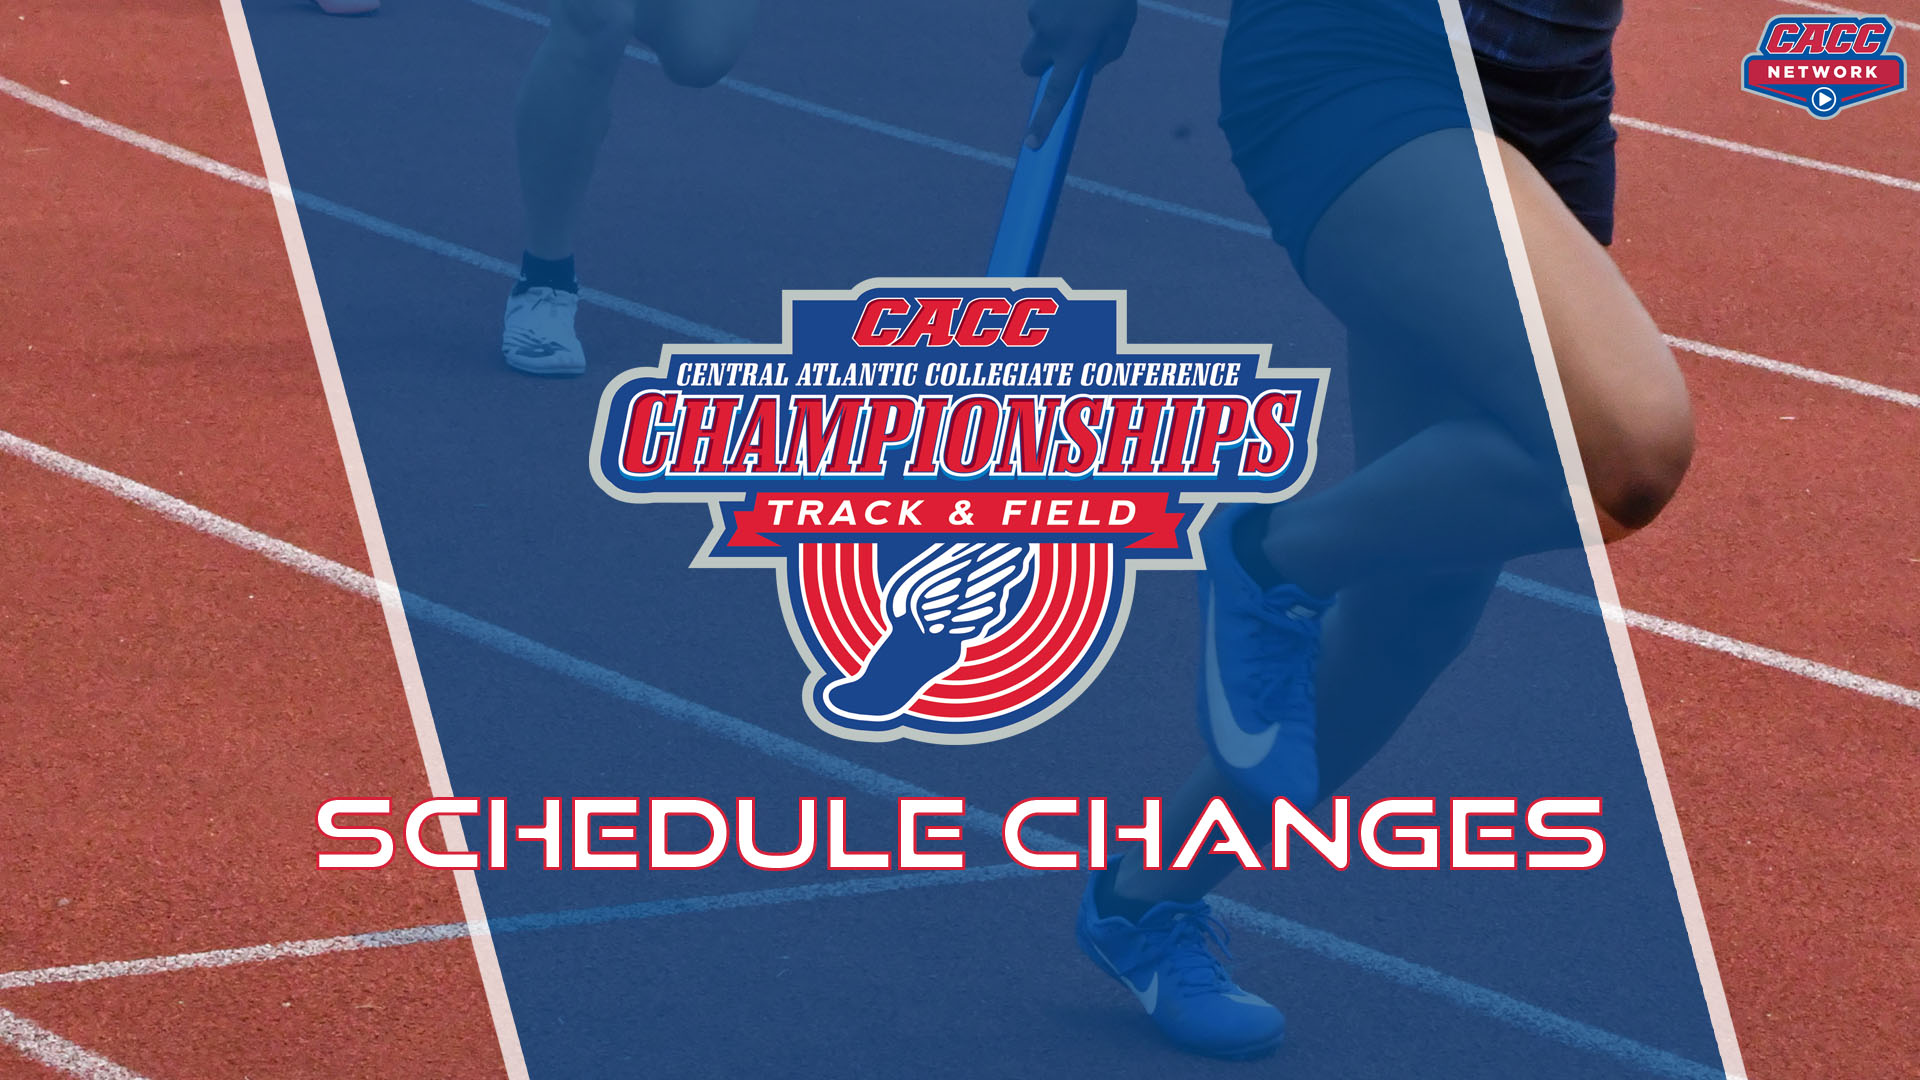 SCHEDULE CHANGES FOR THIS WEEKEND'S CACC T&F CHAMPIONSHIPS